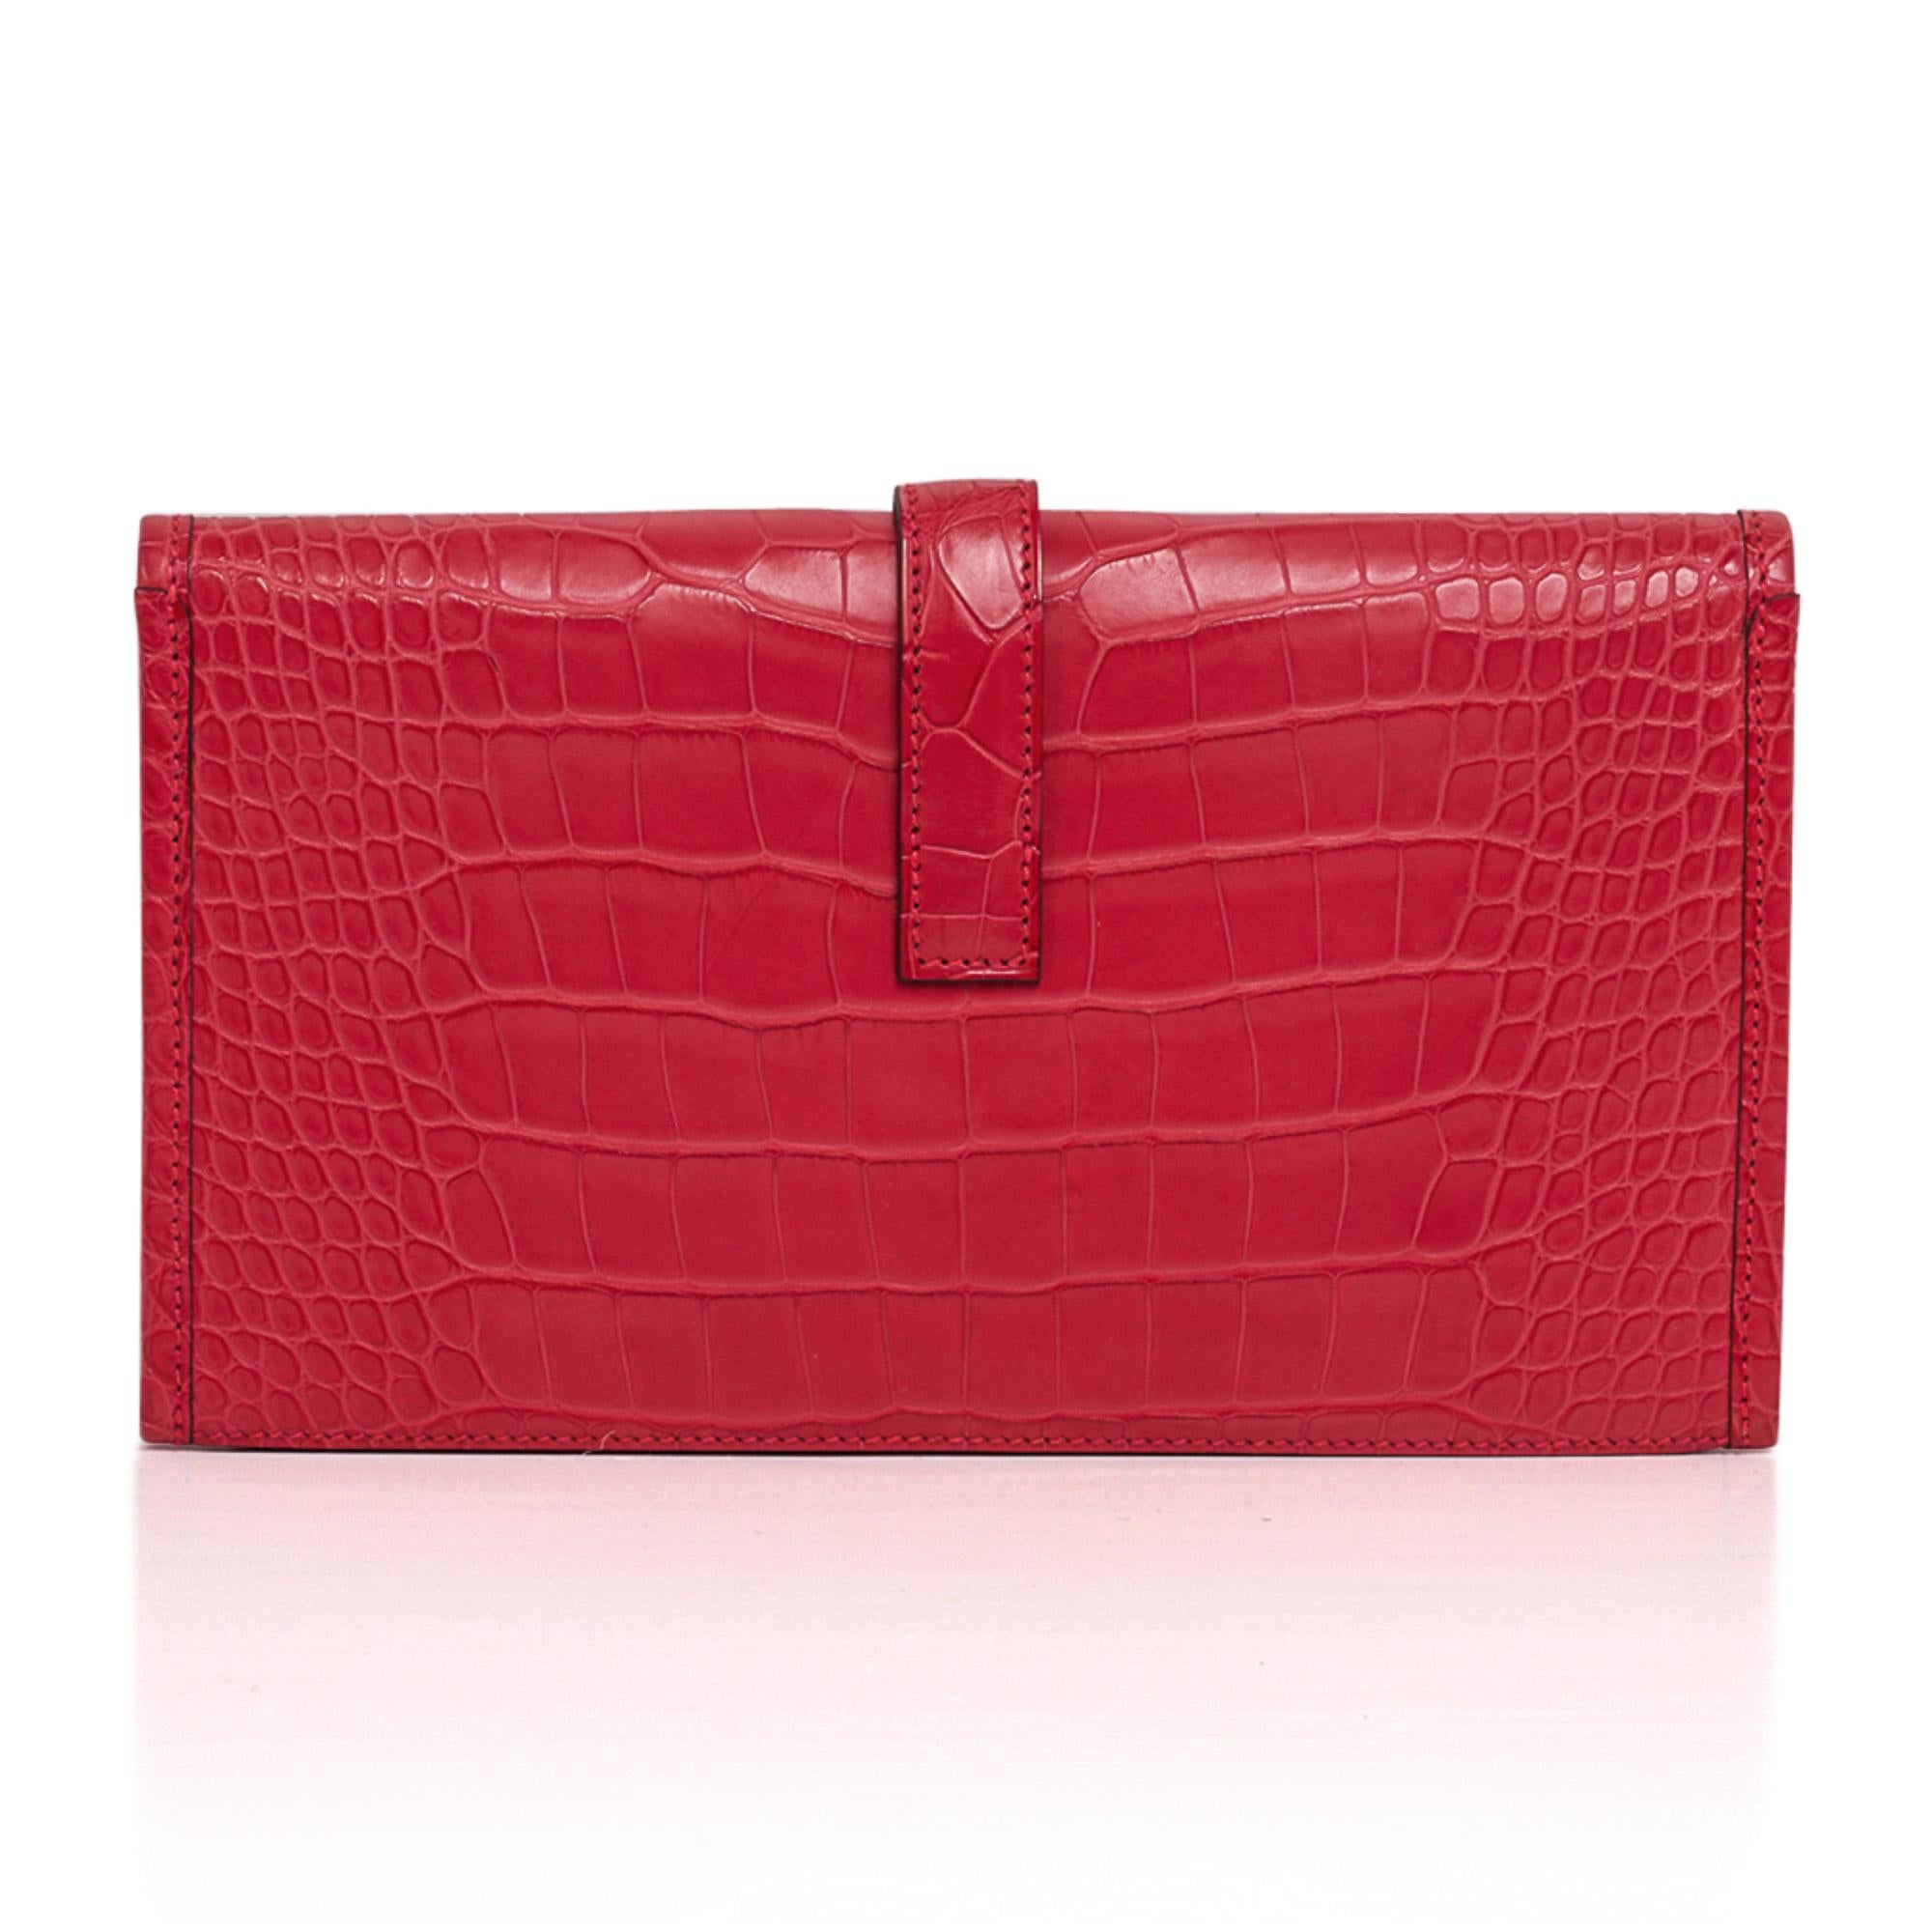 Hermes Jige Duo Wallet / Clutch Rose Extreme Matte Alligator New at ...